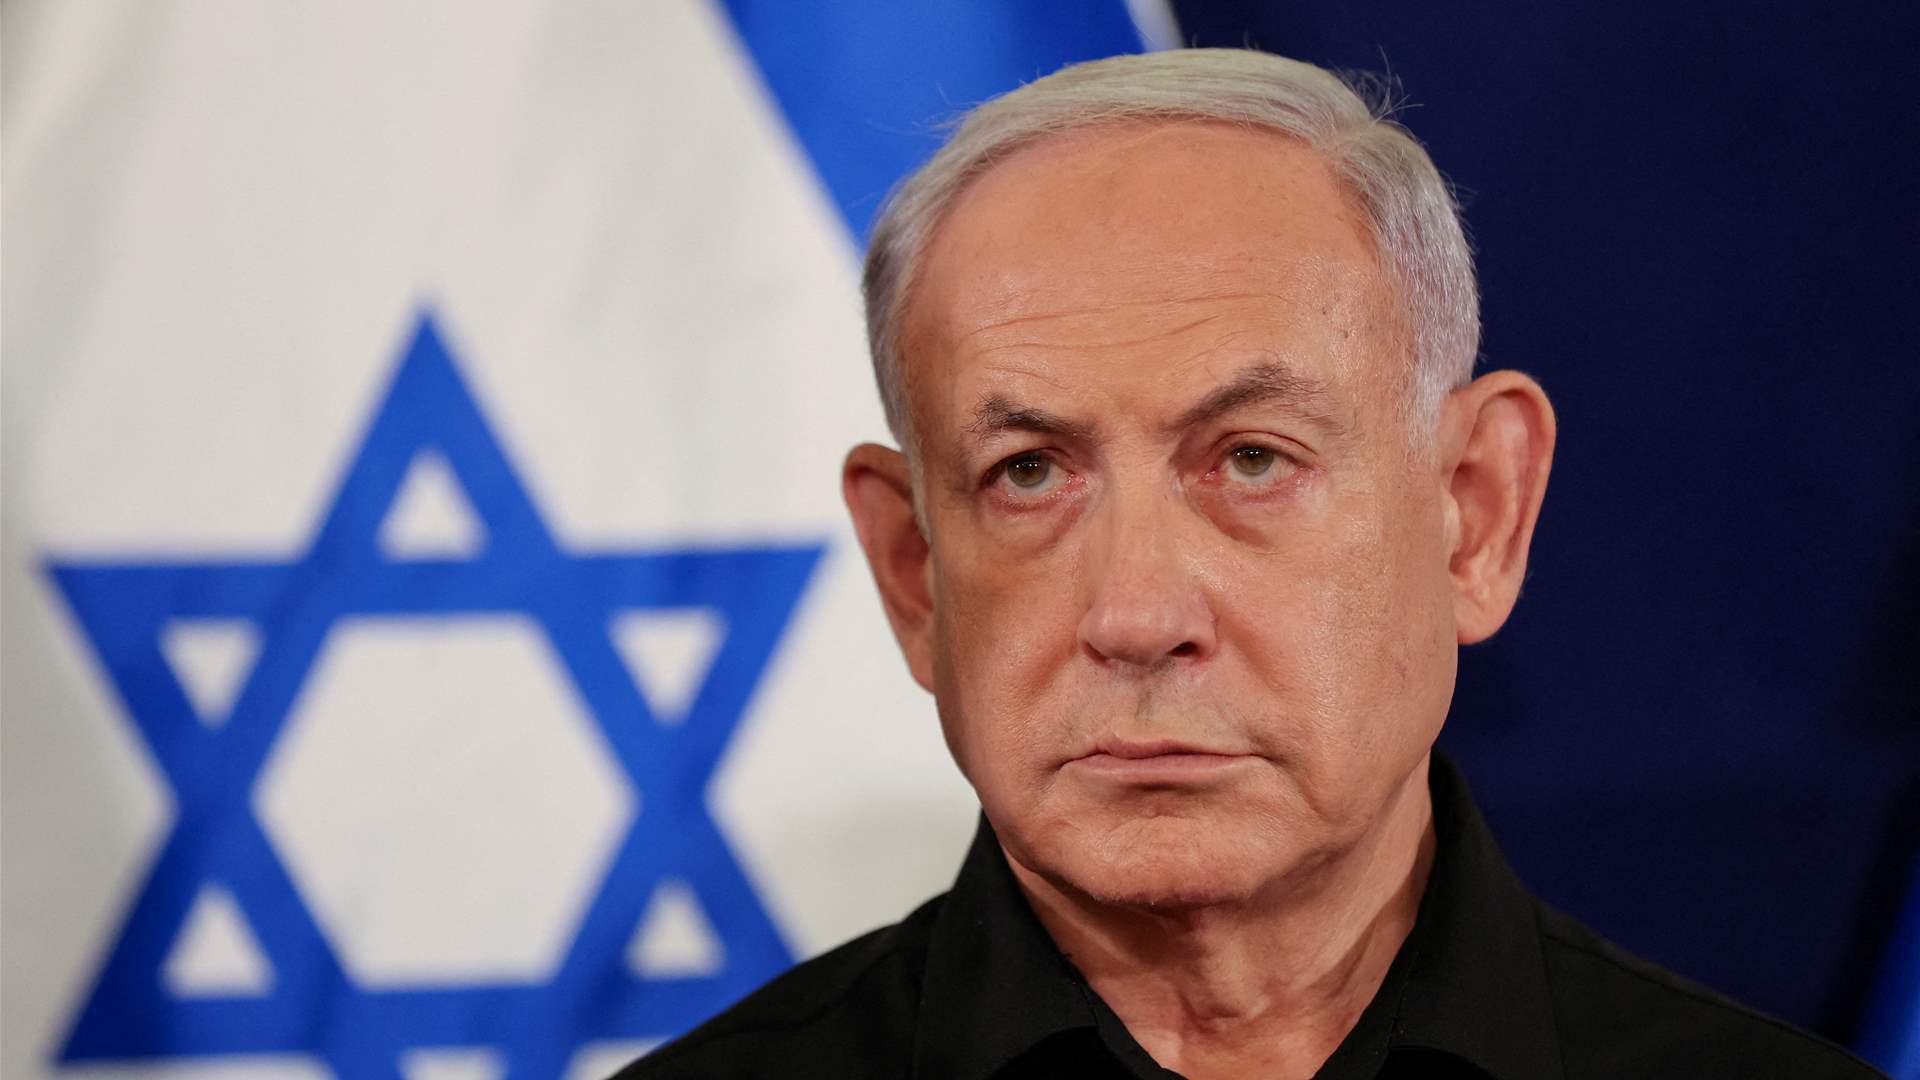 Poll: Only 15 percent of Israelis want Netanyahu to remain in office after the war 